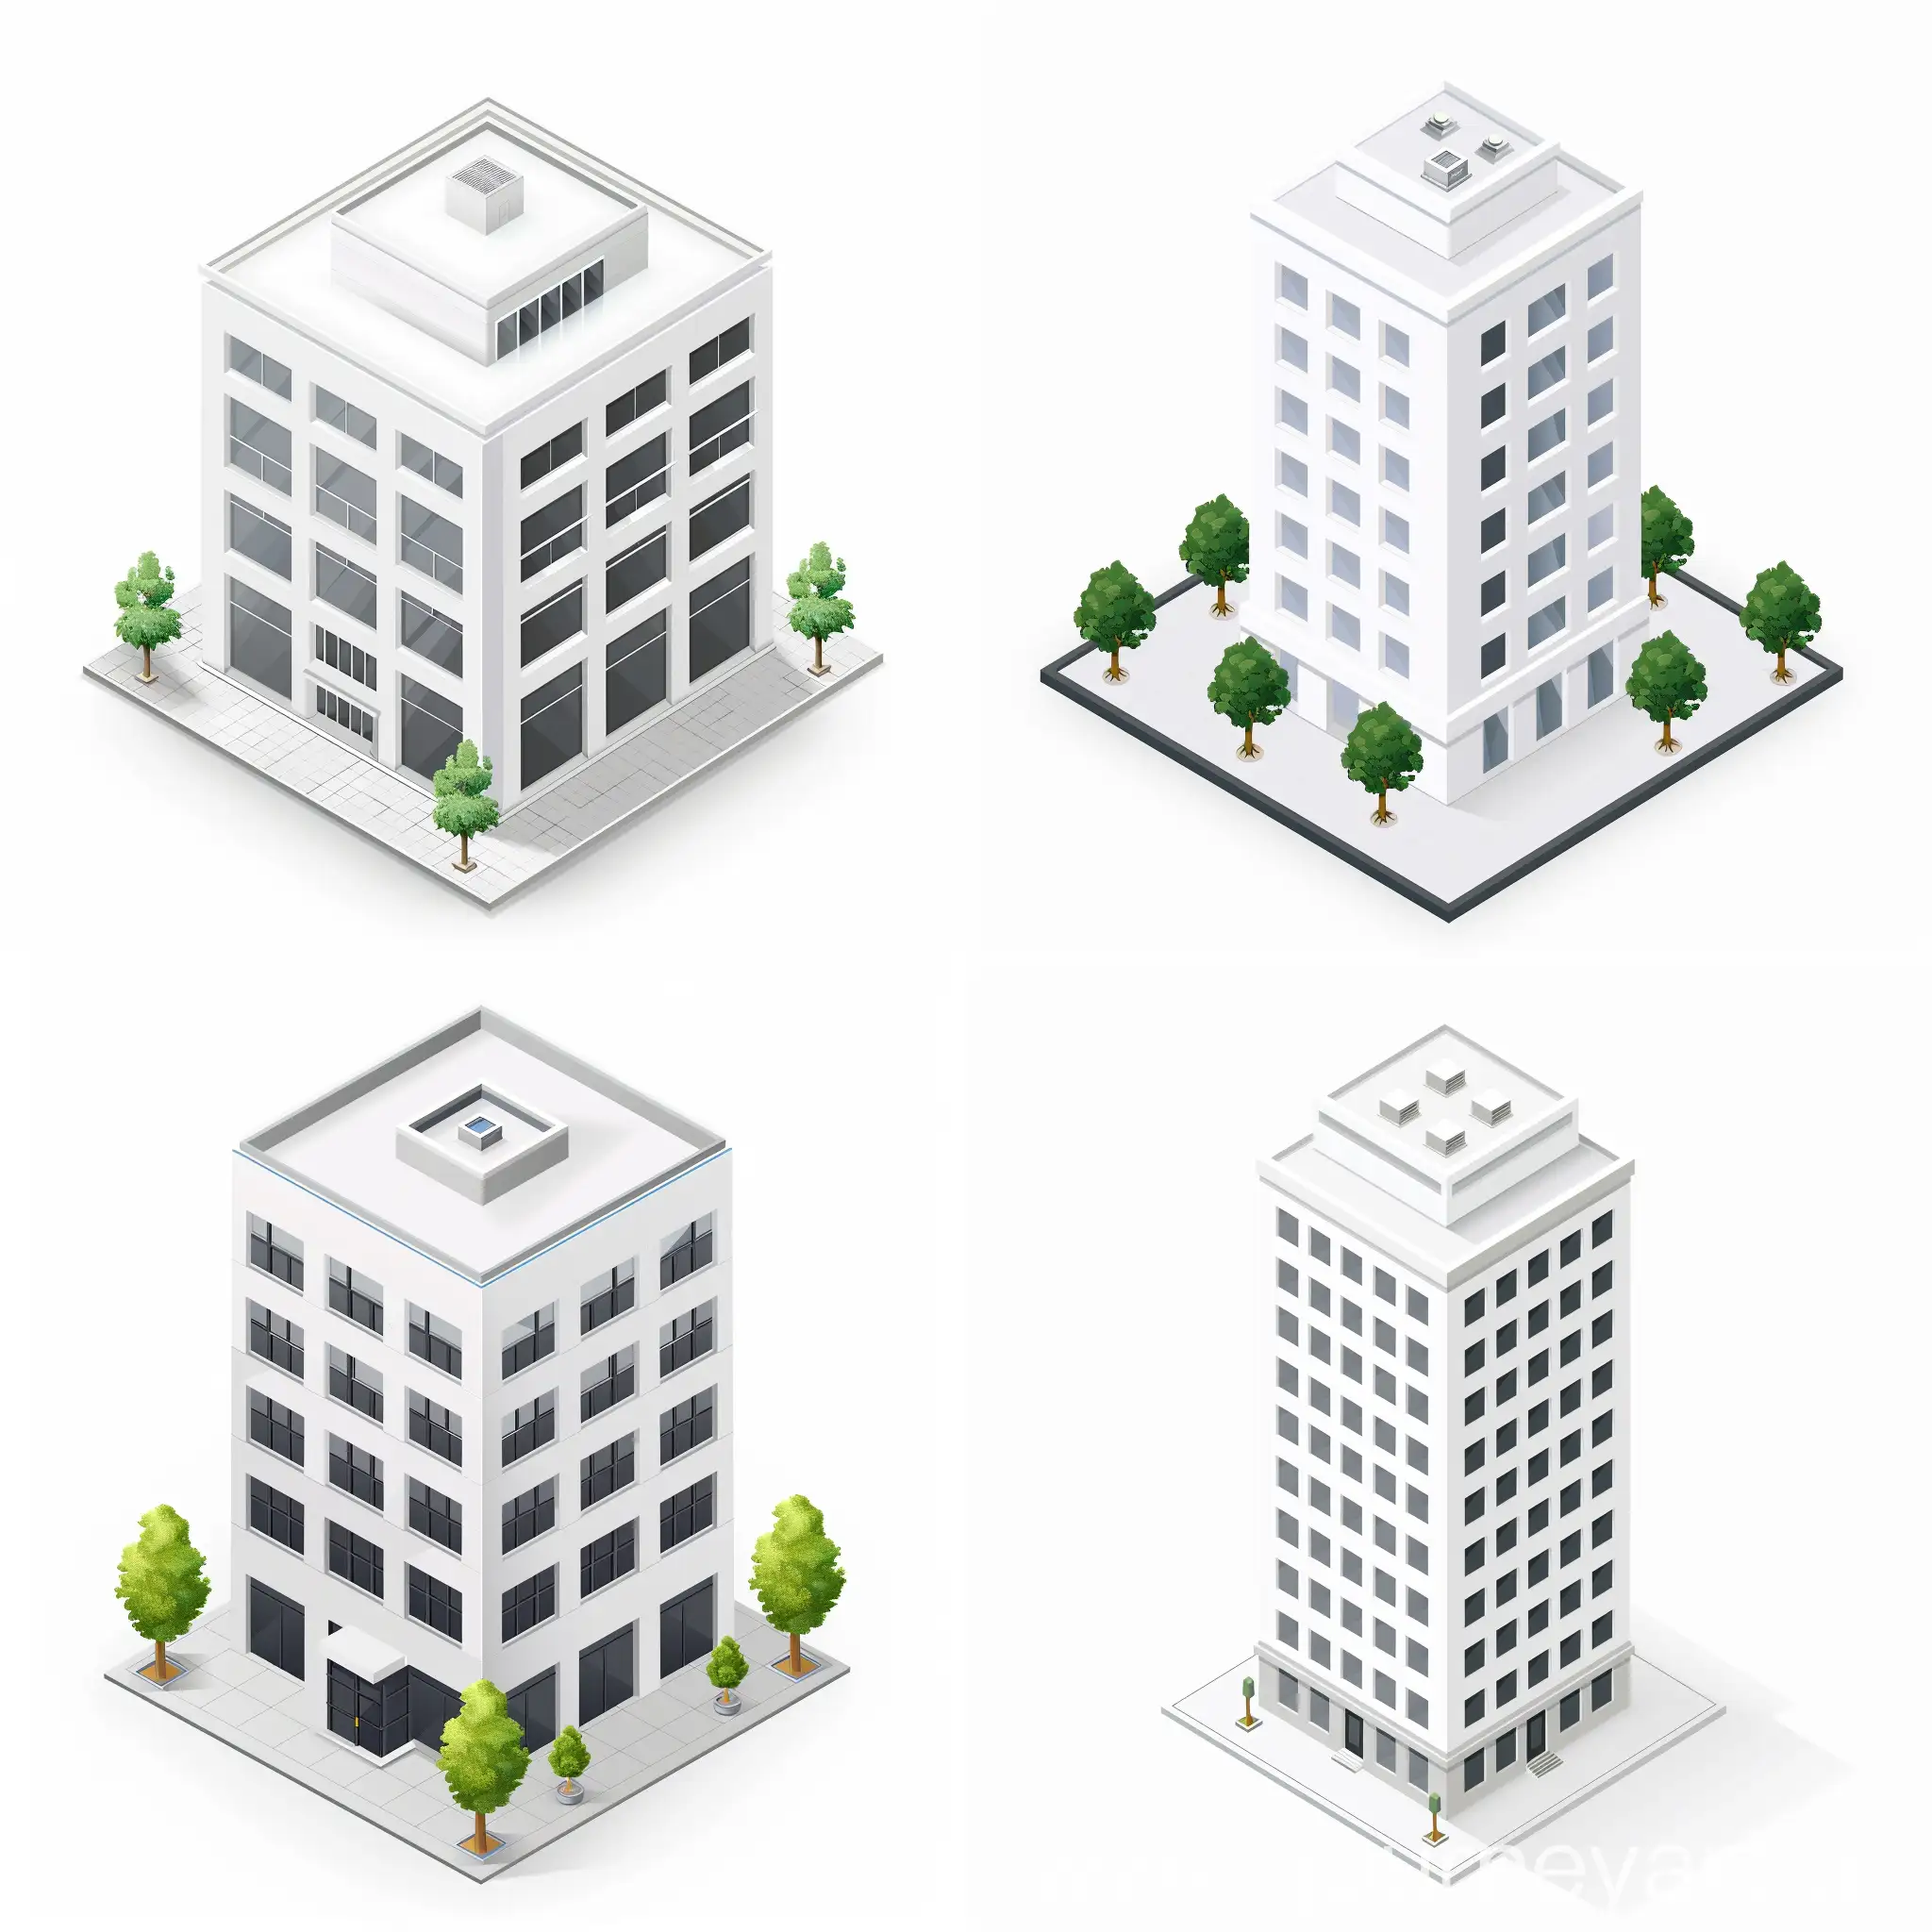 white isometric building in urban style on white background, in vector